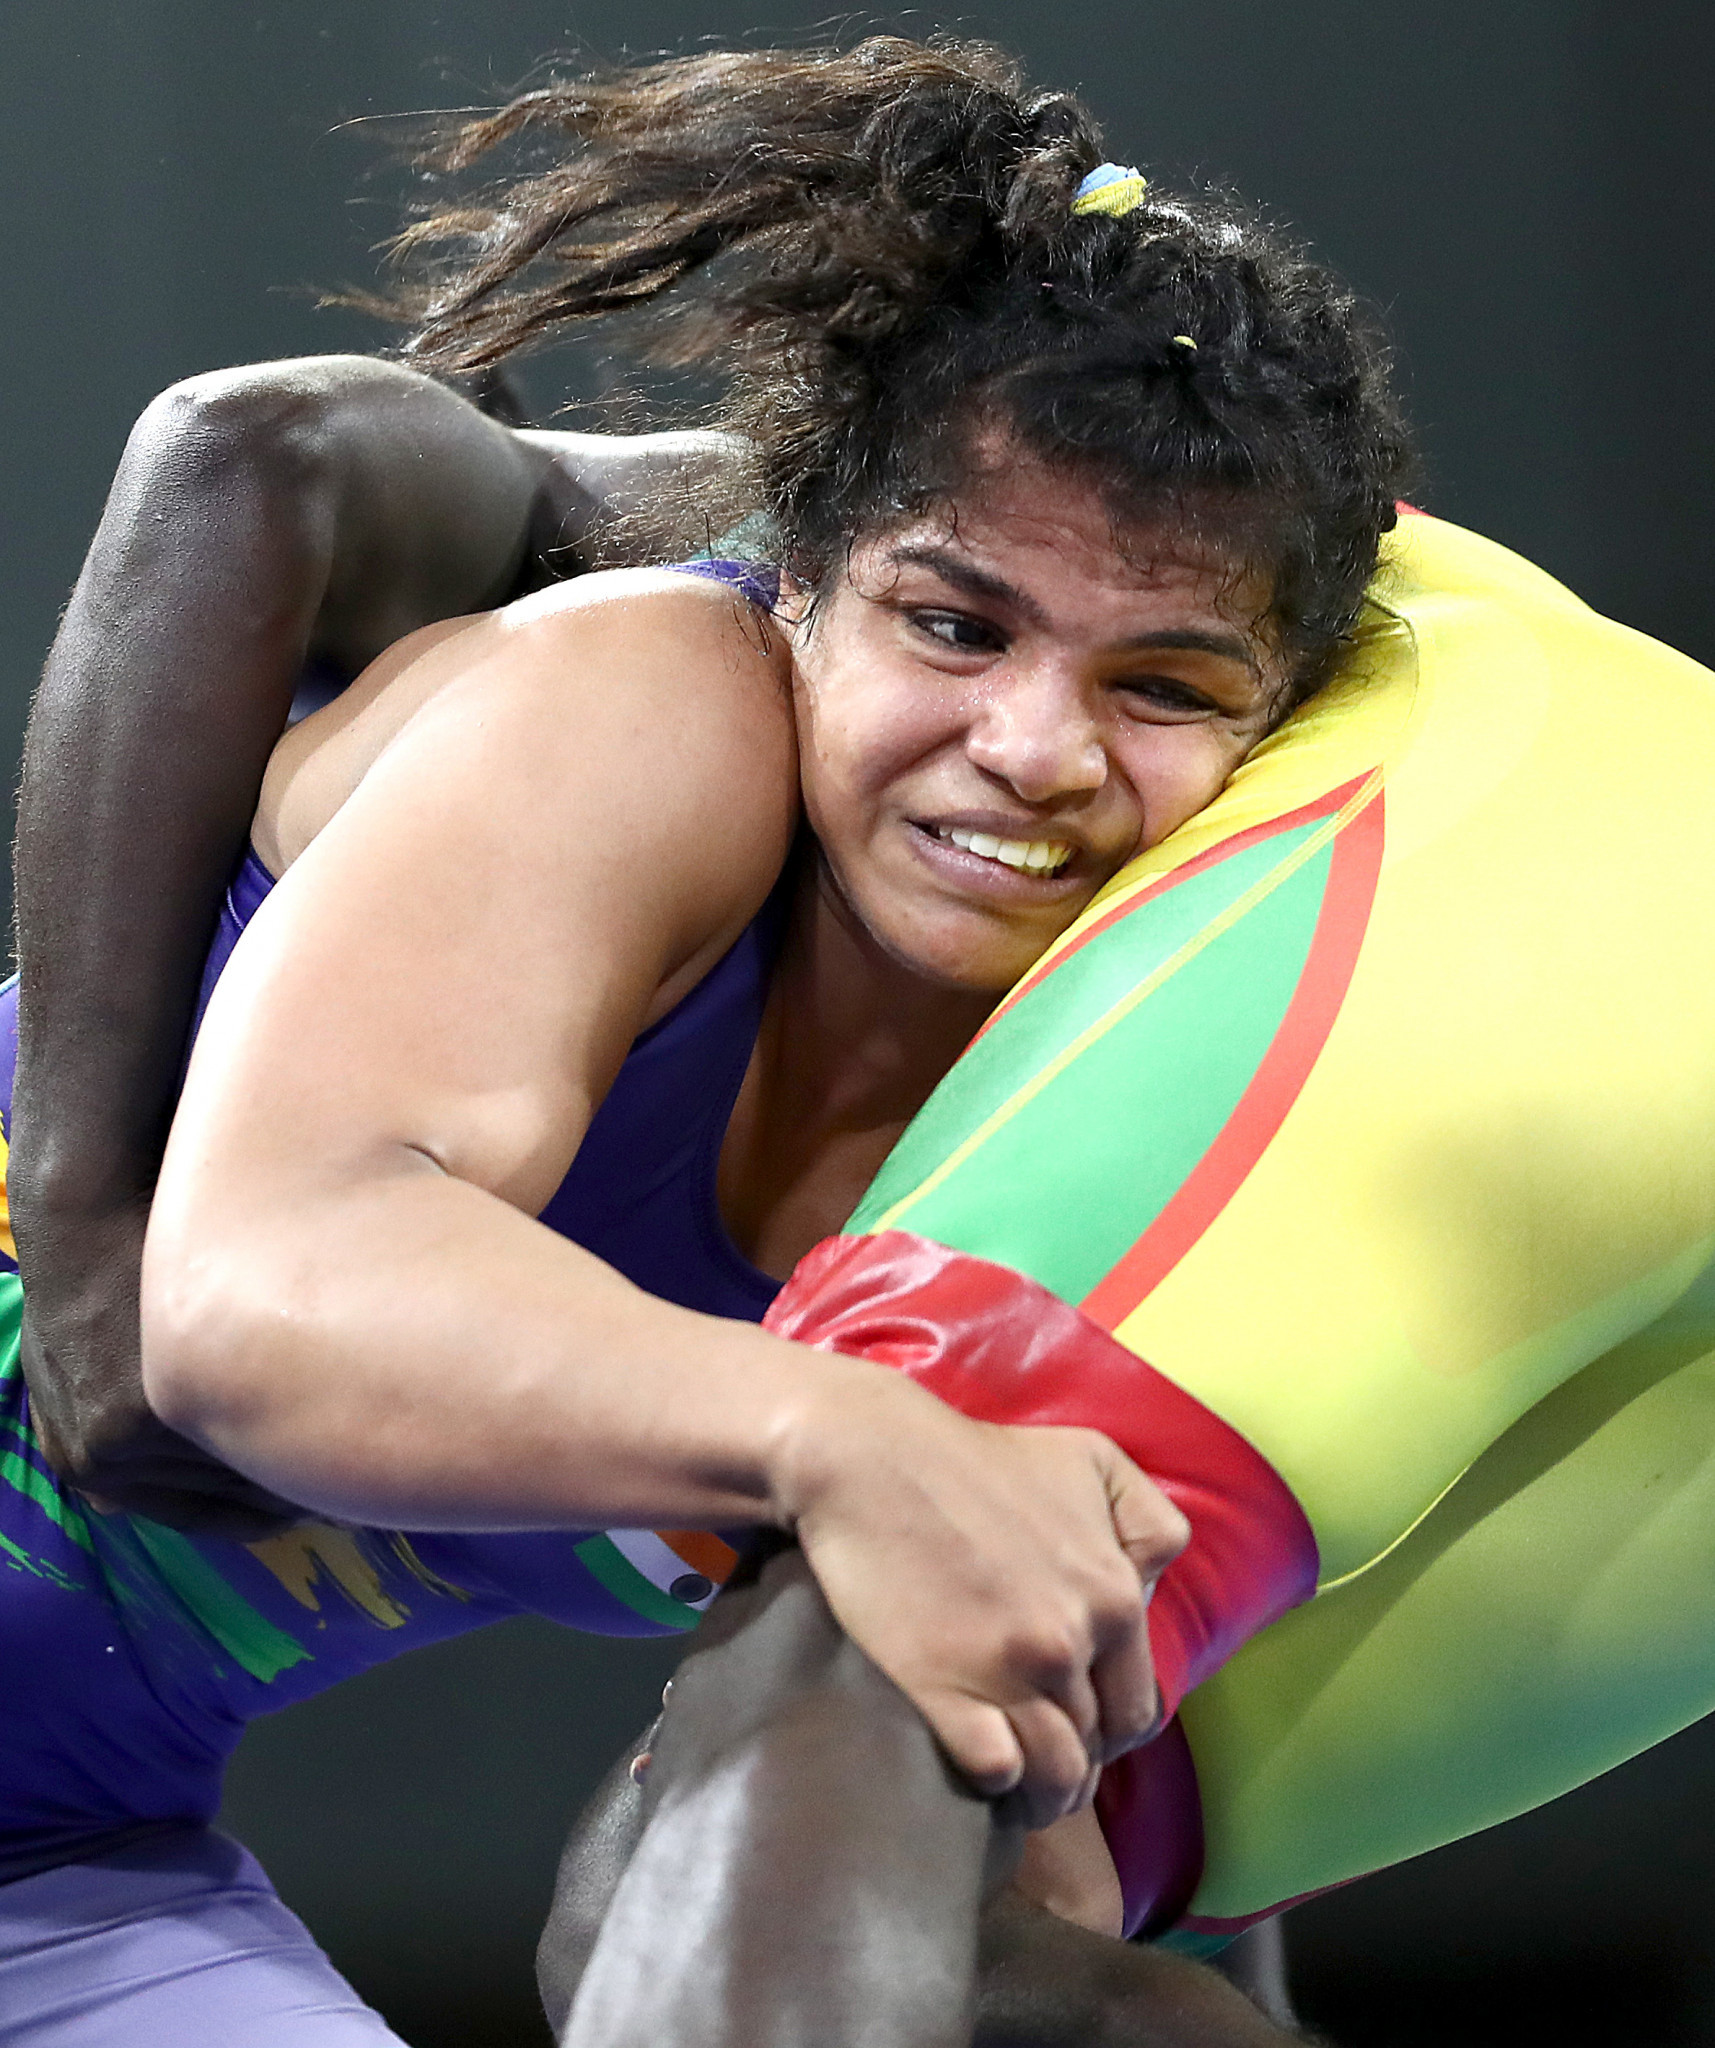 Satyawart Kadian, the husband of Rio 2016 Olympic bronze medallist Sakshi Malik, pictured, has also been barred from the training camp ©Getty Images